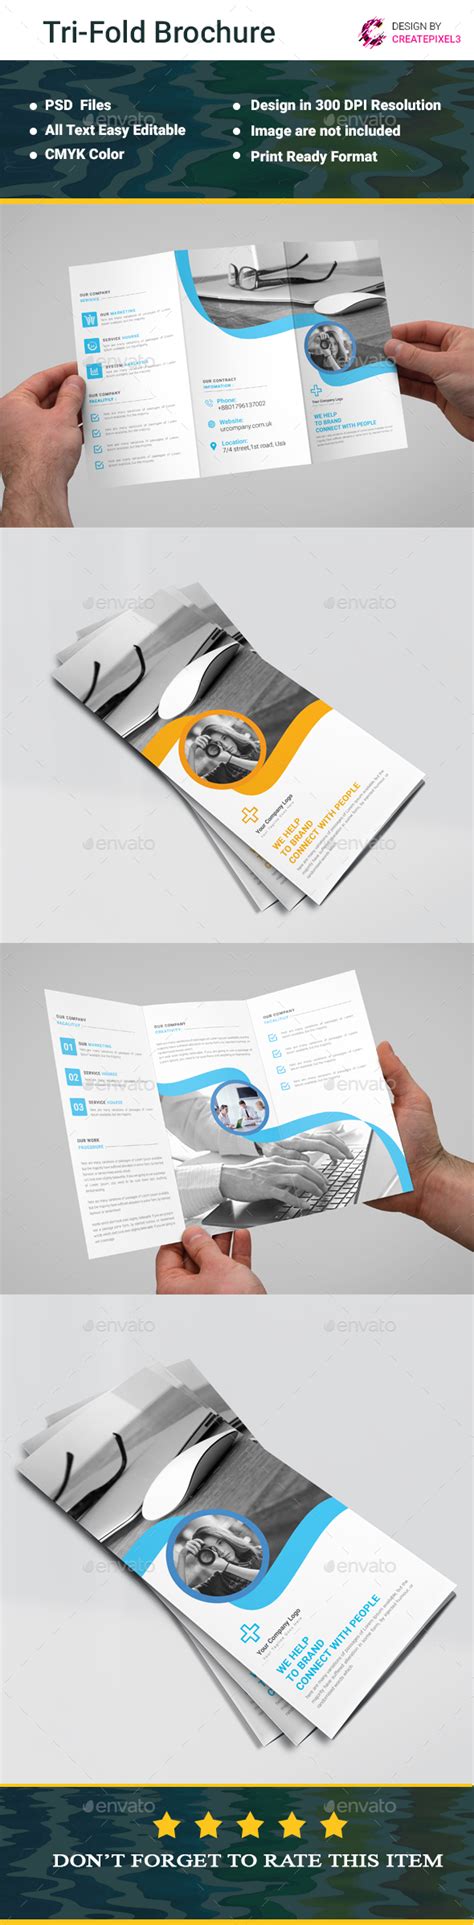 Great mockups that will help you visualize your work. Tri Fold Brochure Template PSD | Trifold brochure, Brochure psd, Brochure